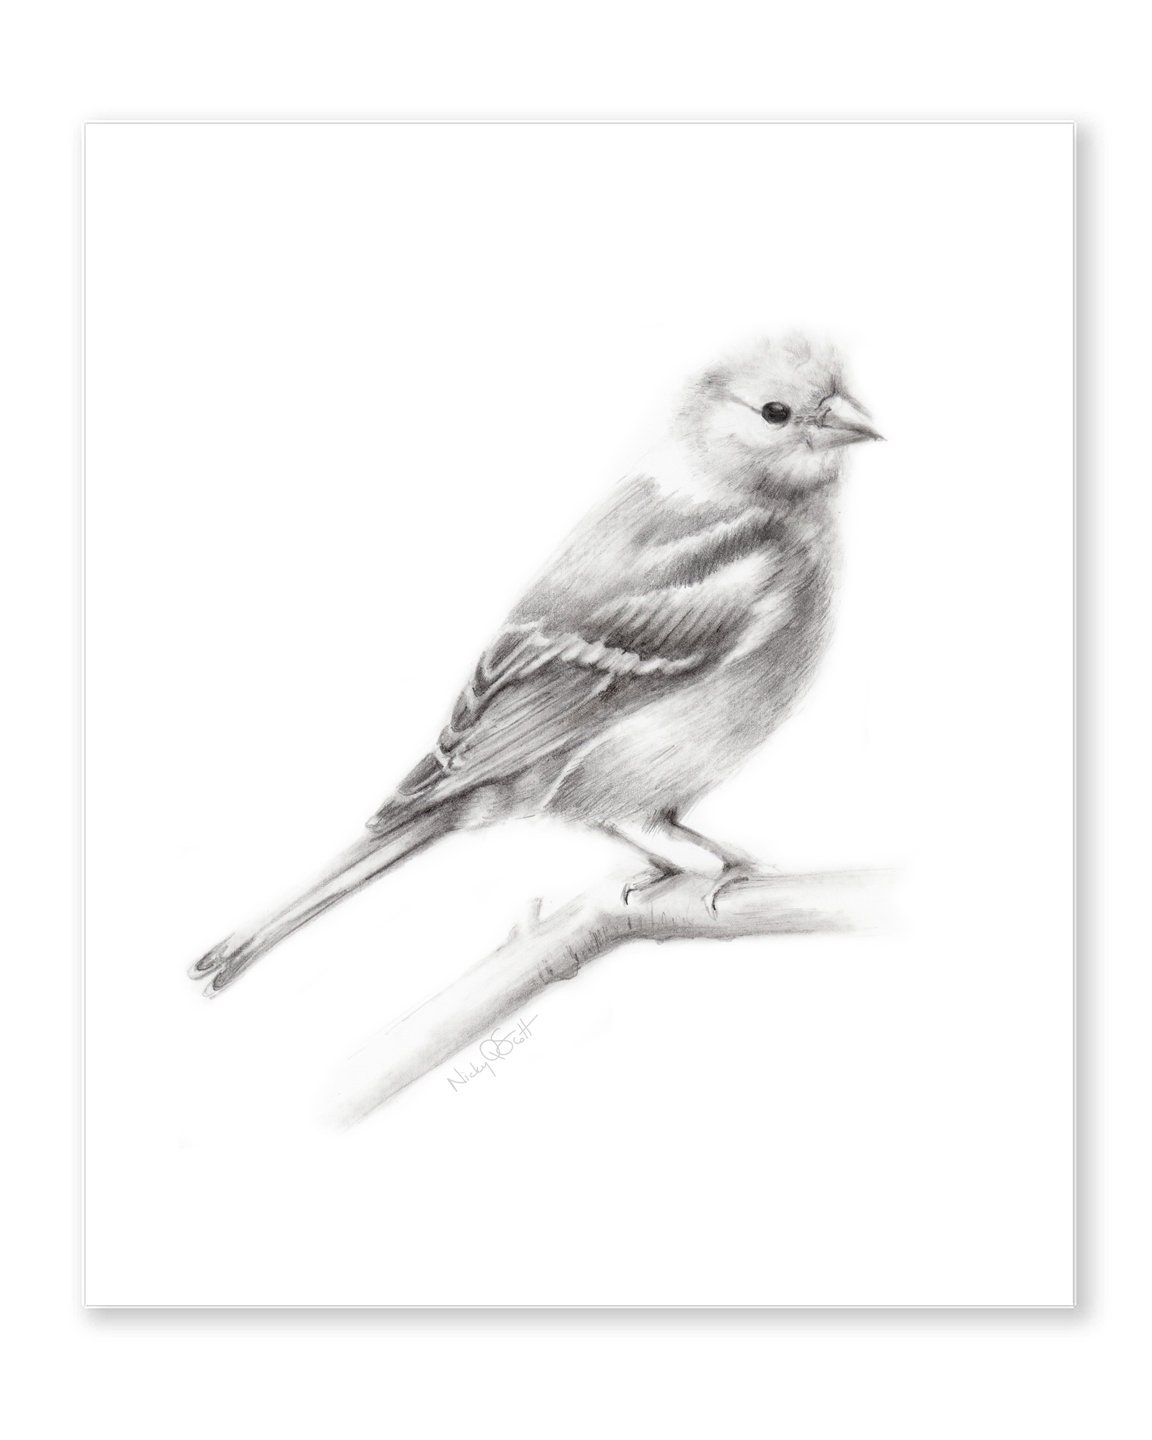 Public Domain Clip Art Image, Sketchpad, with drawing of a bird, ID:  13550826612701